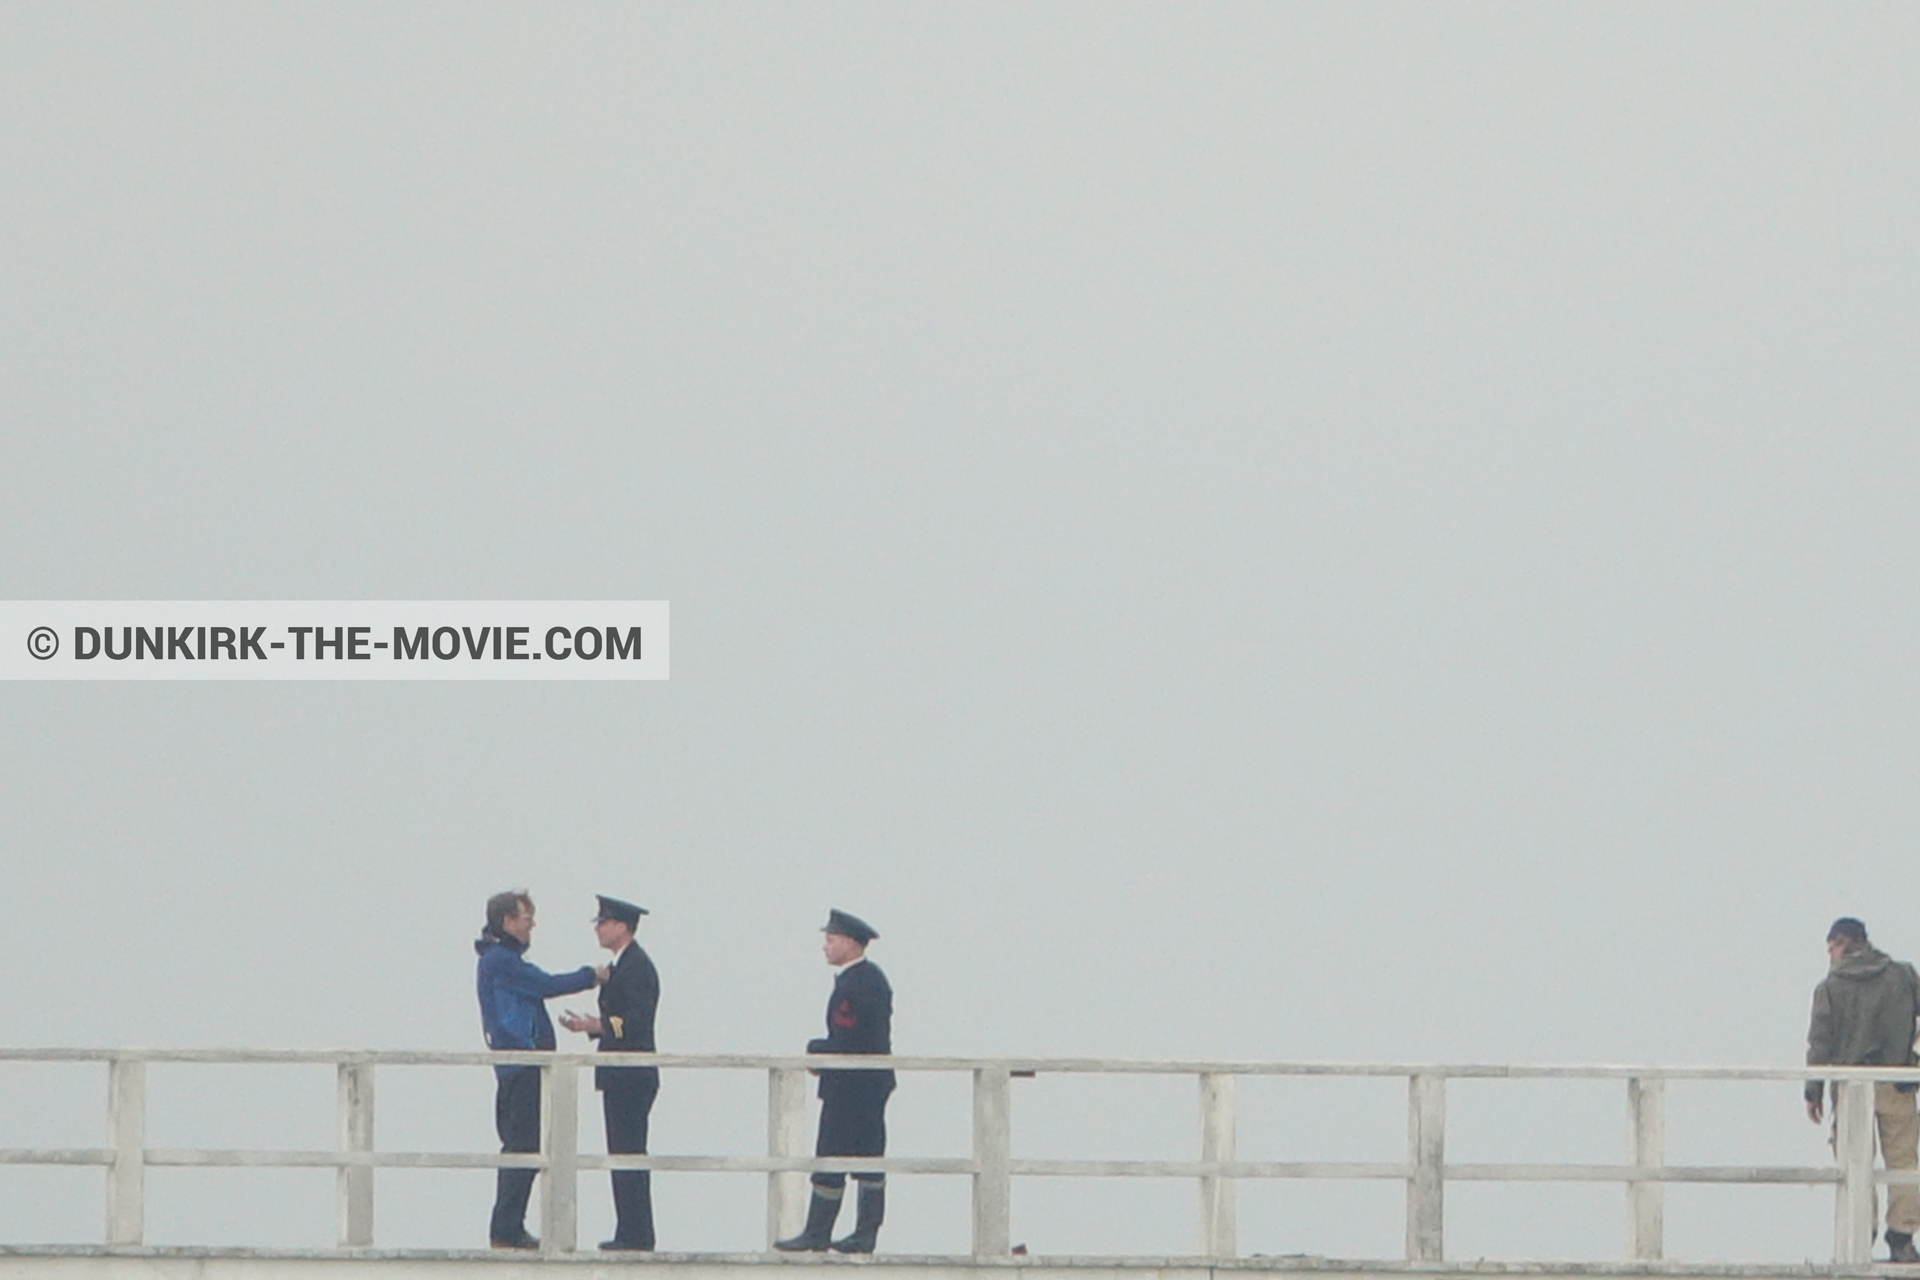 Picture with actor, grey sky, EST pier, technical team,  from behind the scene of the Dunkirk movie by Nolan